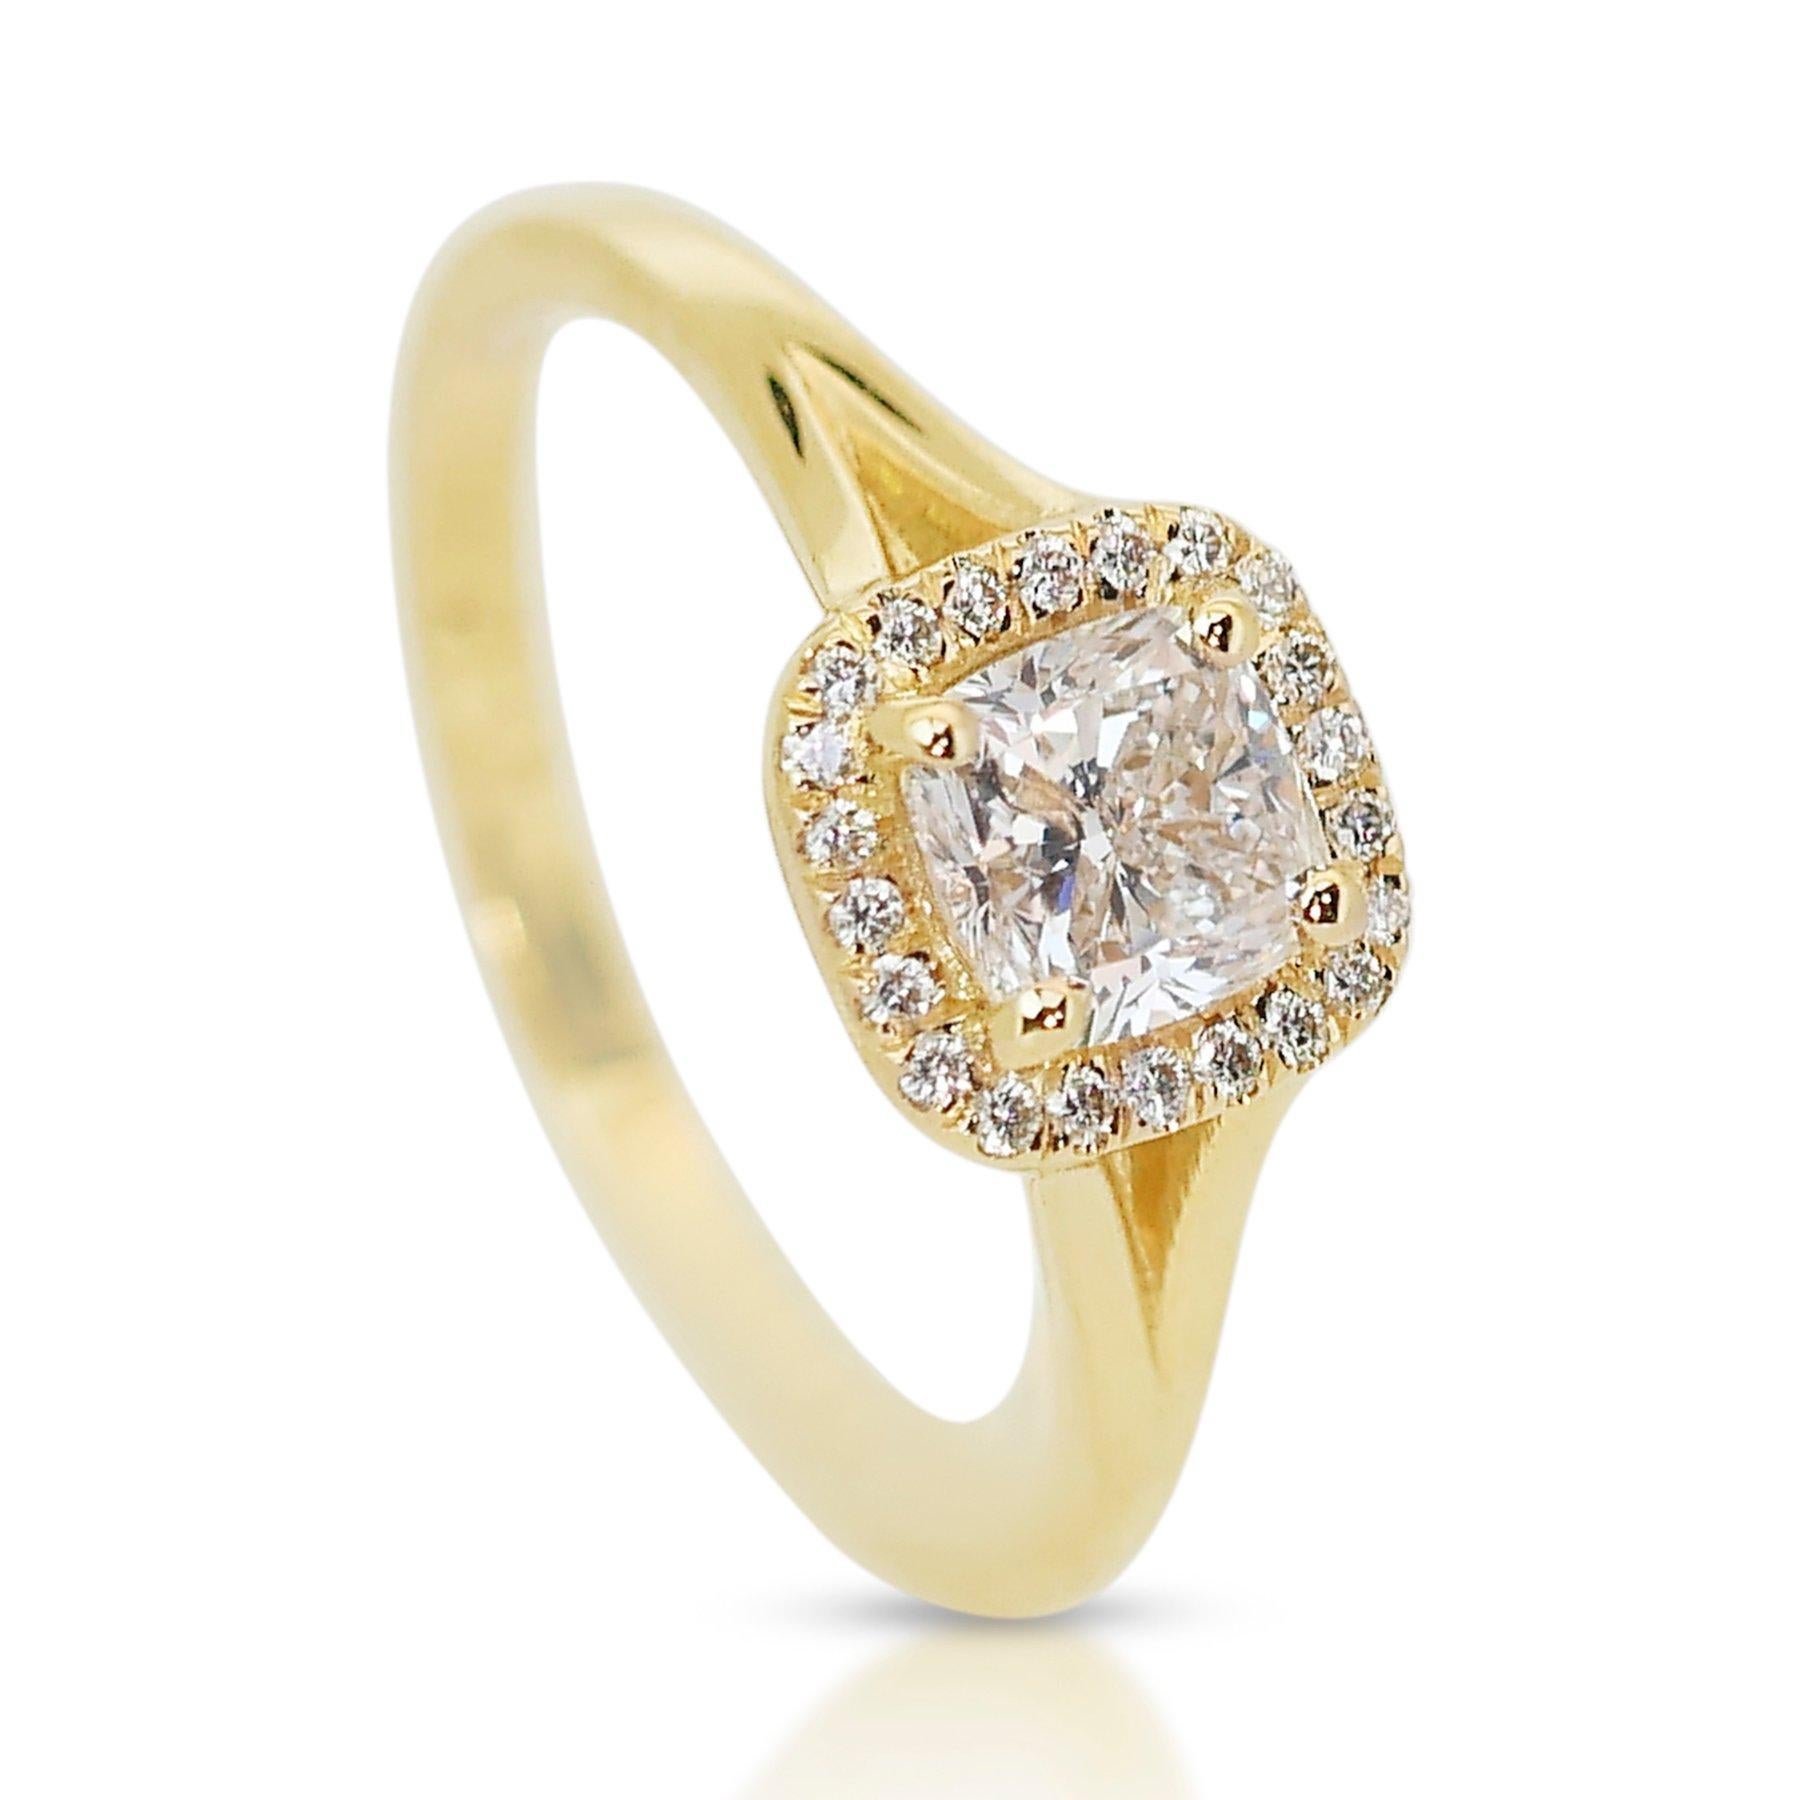 Cushion Cut Sparkling 1.63ct Diamond Halo Ring in 18k Yellow Gold - GIA Certified For Sale